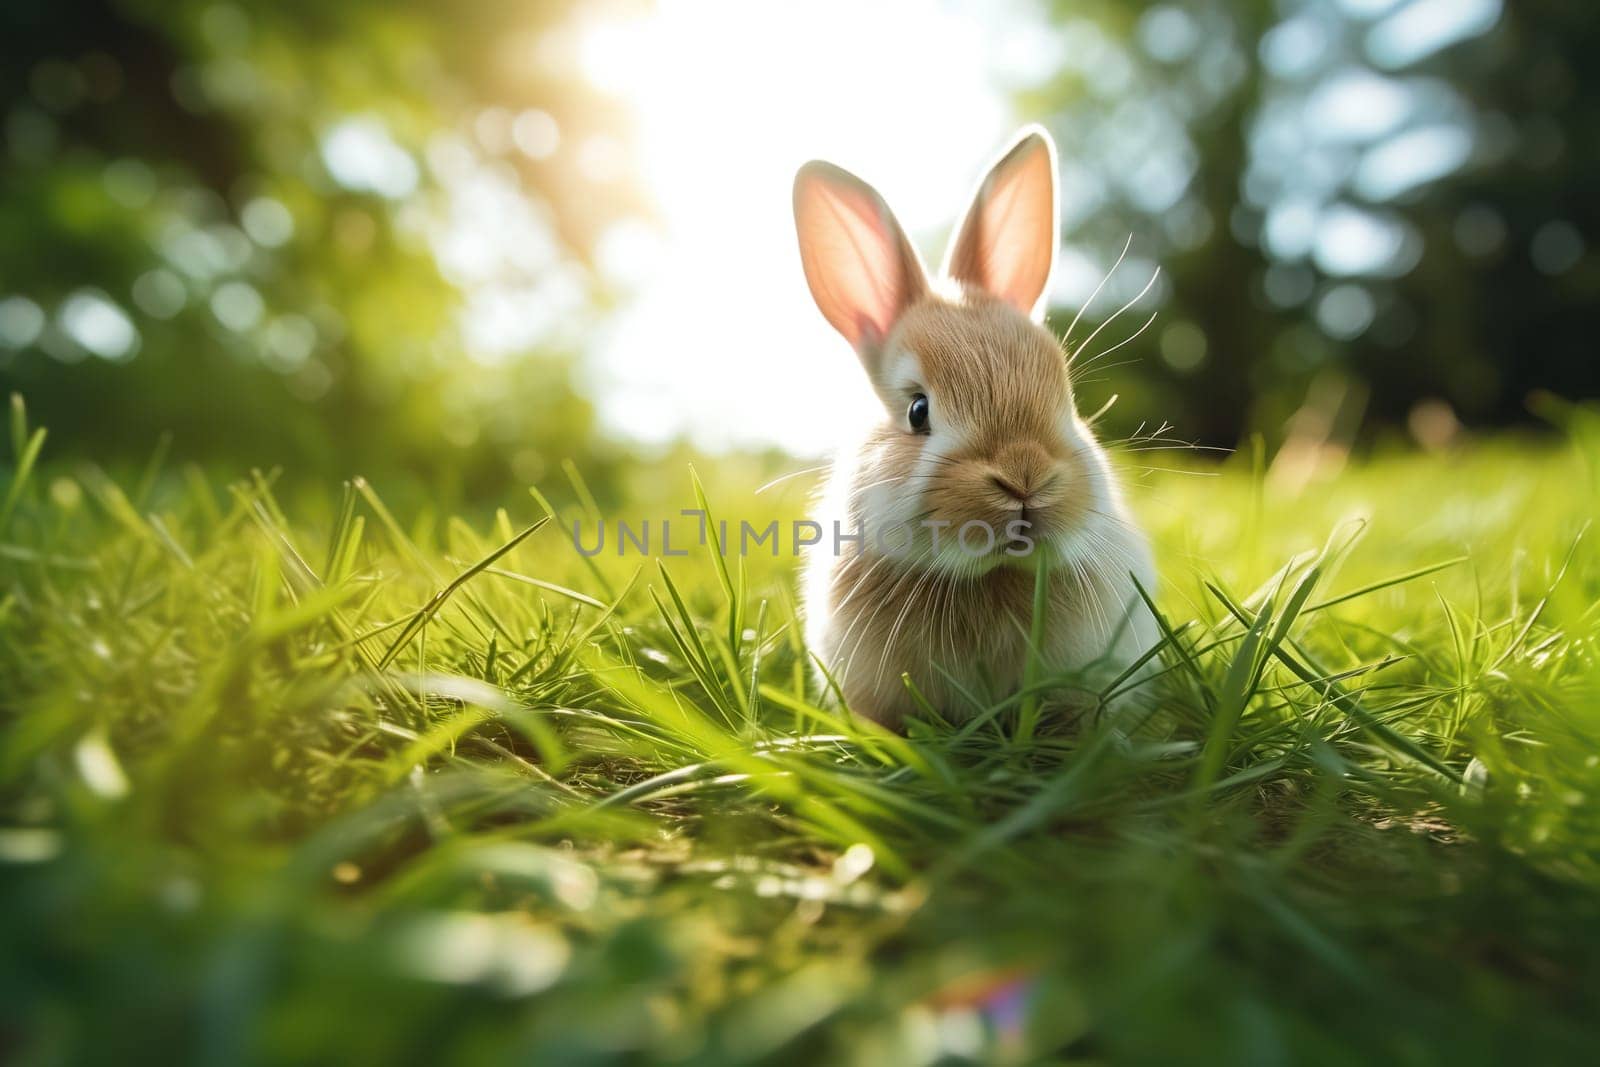 Bunny in Lush Green Field on Golden Hour by dimol